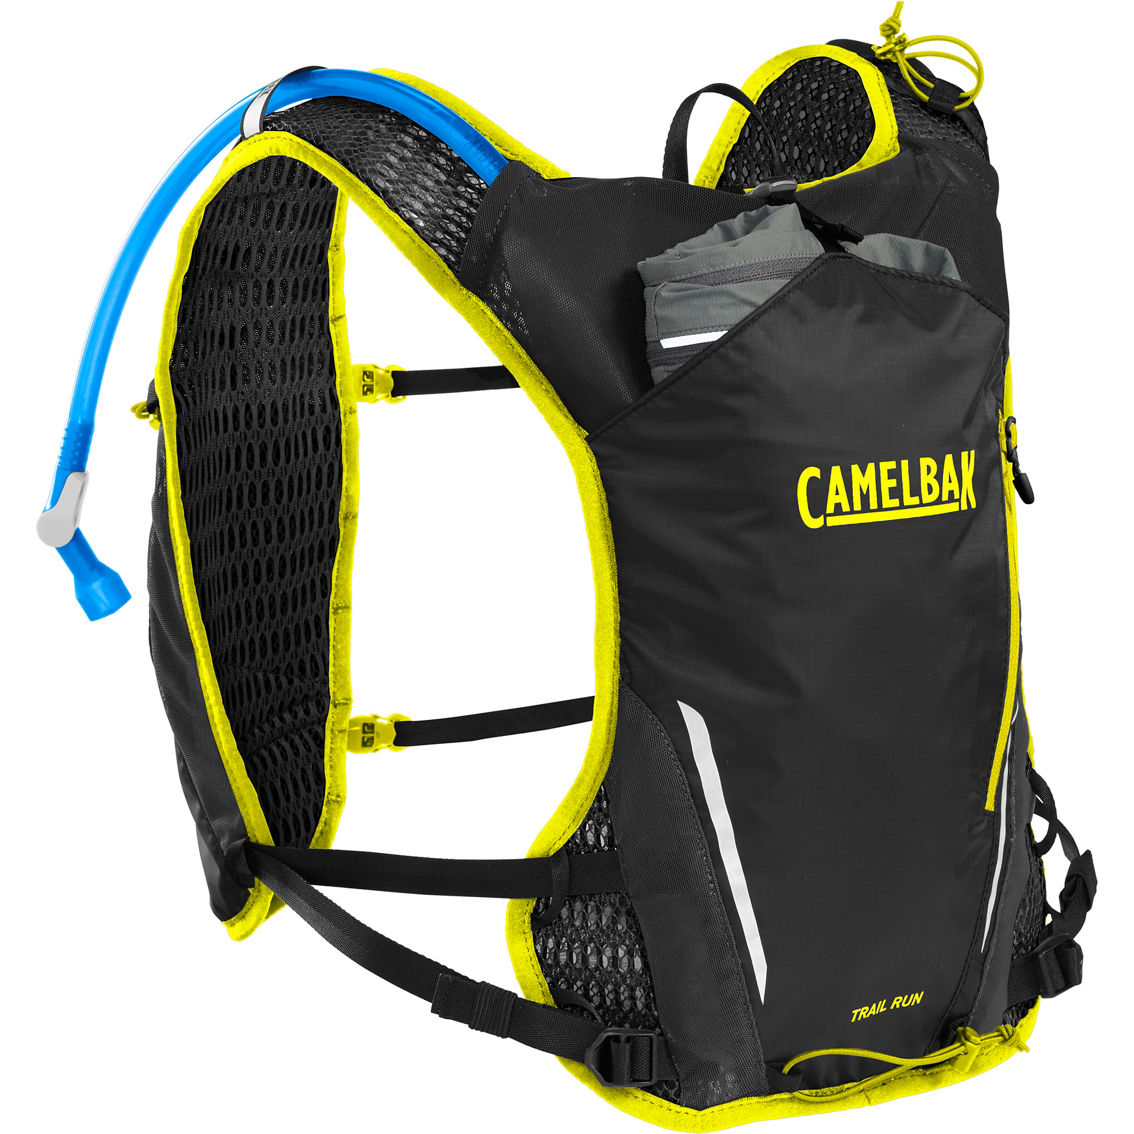 Camelbak Trail Run Vest with Two 17 oz. Quick Stow Flasks - Image 4 of 8